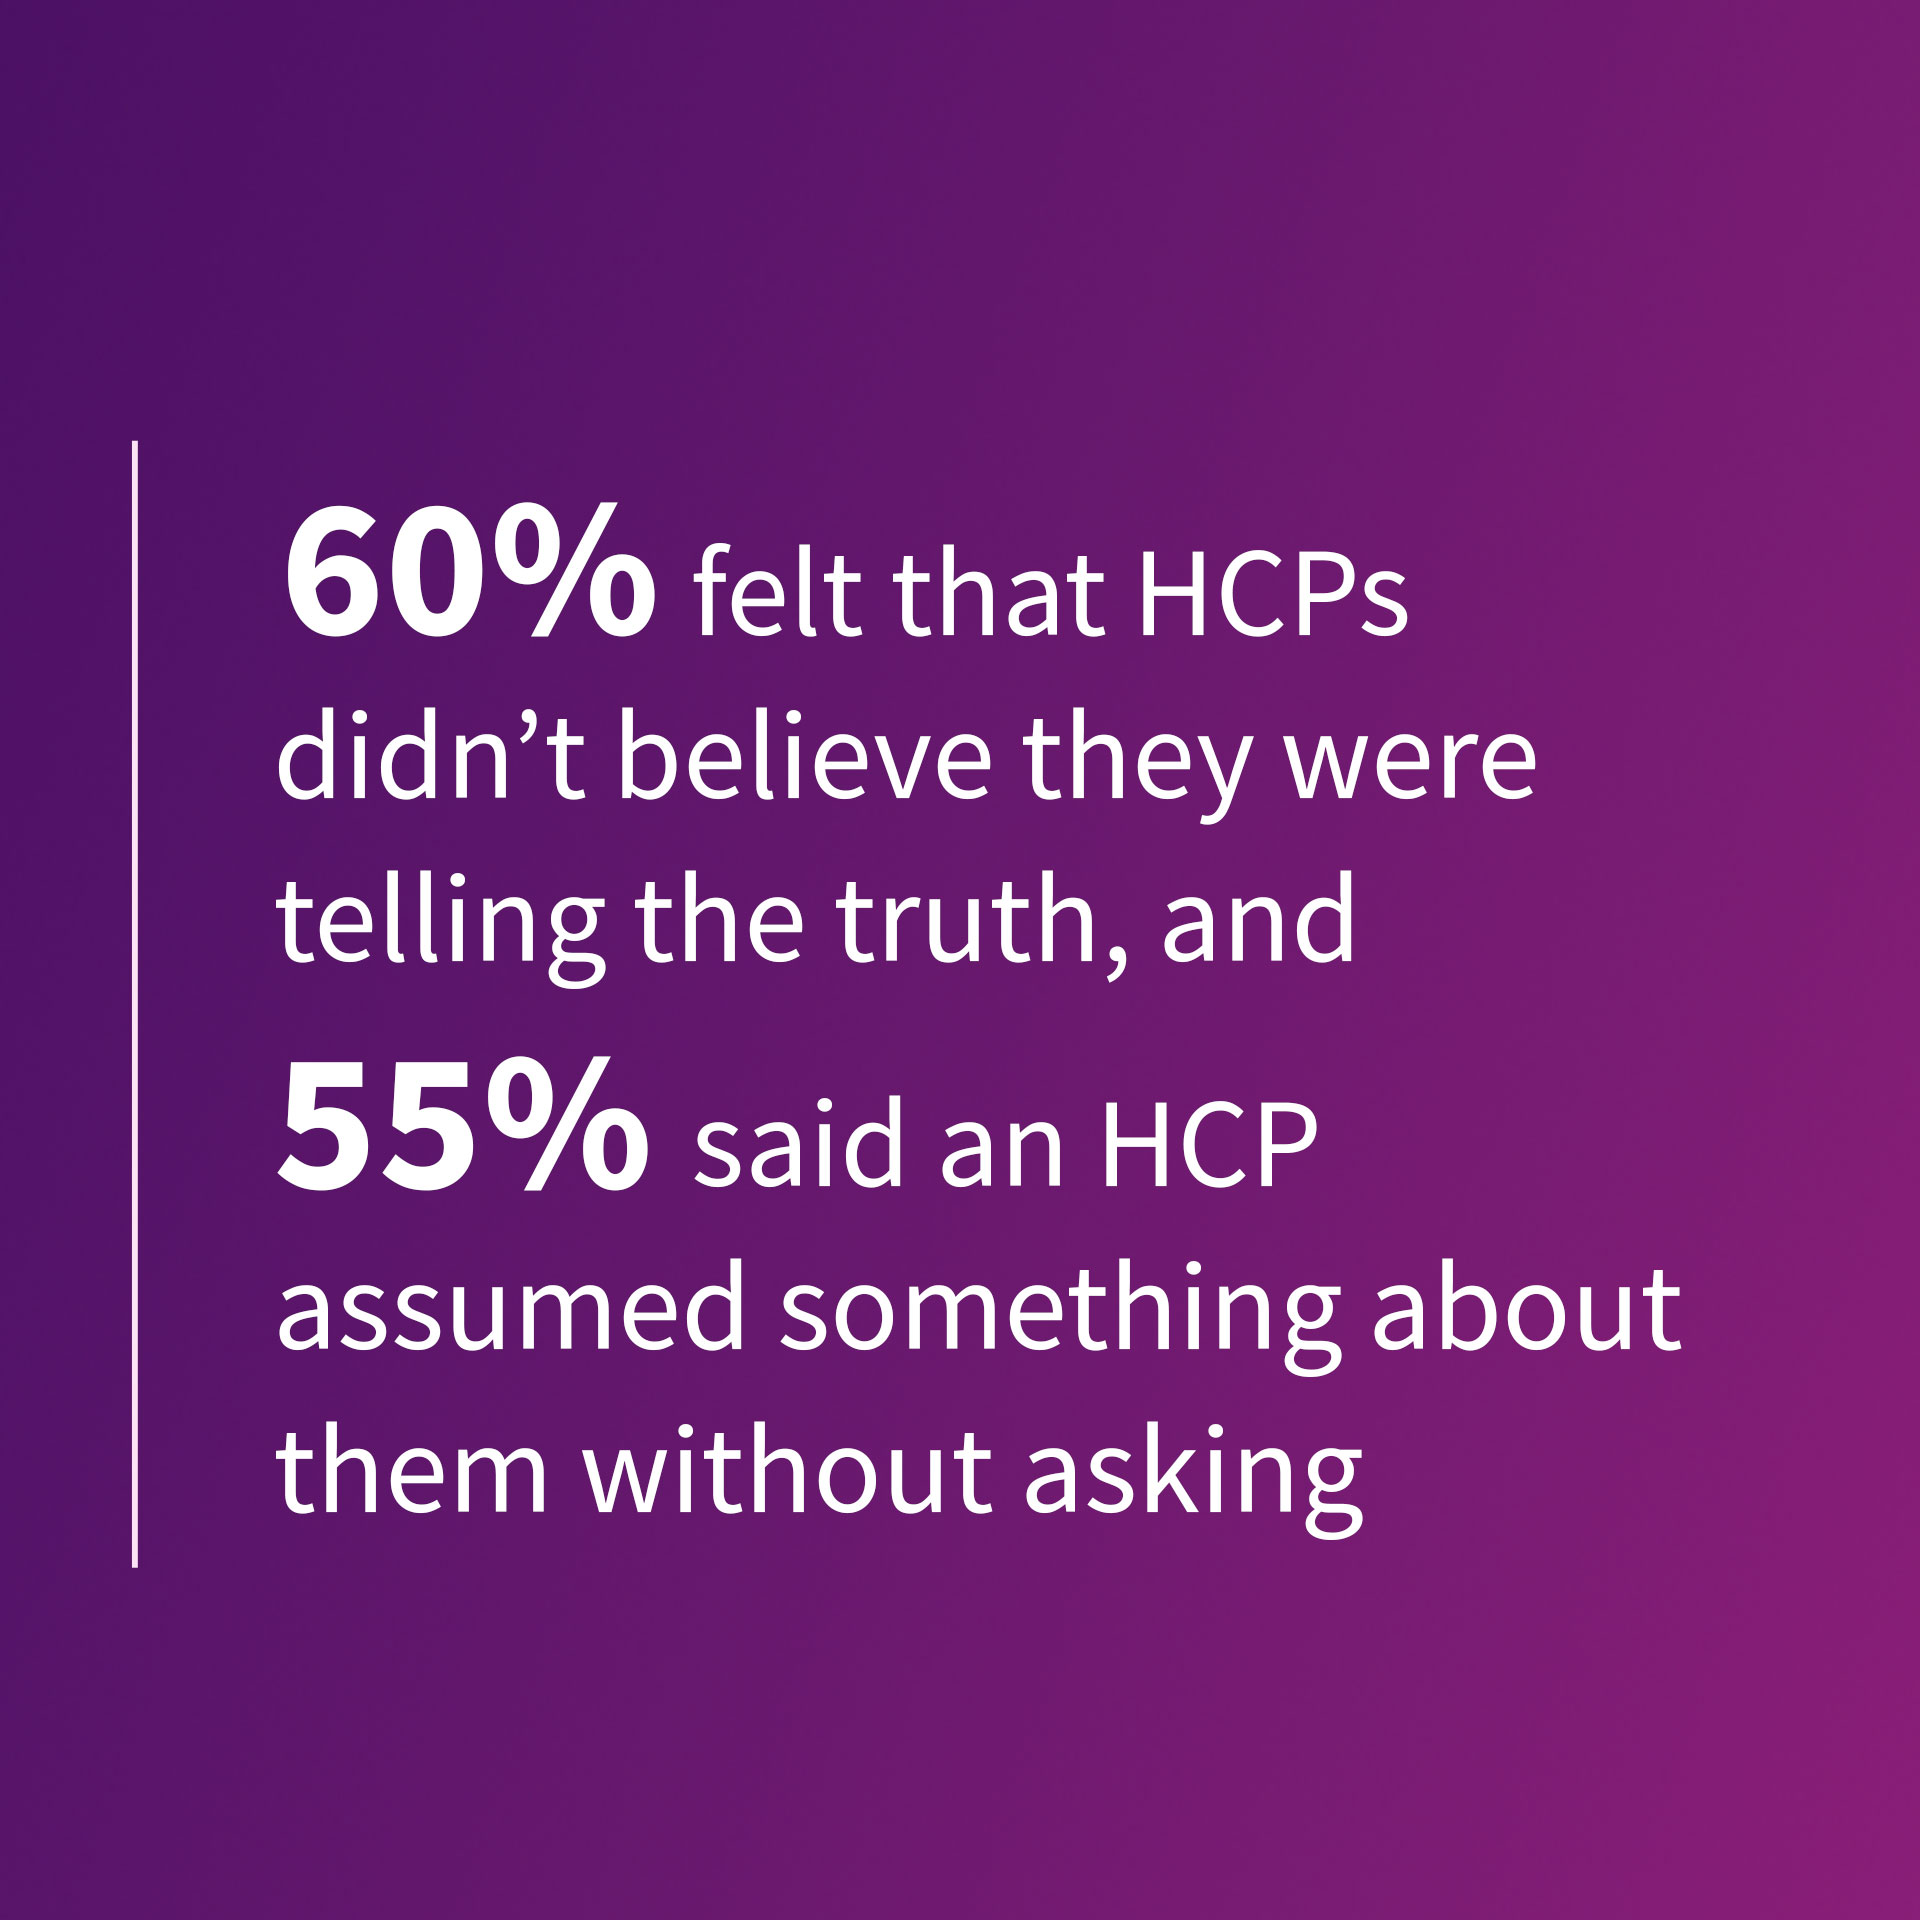 An infographic with white text on a purple background reading “60% felt that HCPs didn’t believe they were telling the truth, and 55% said an HCP assumed something about them without asking.”